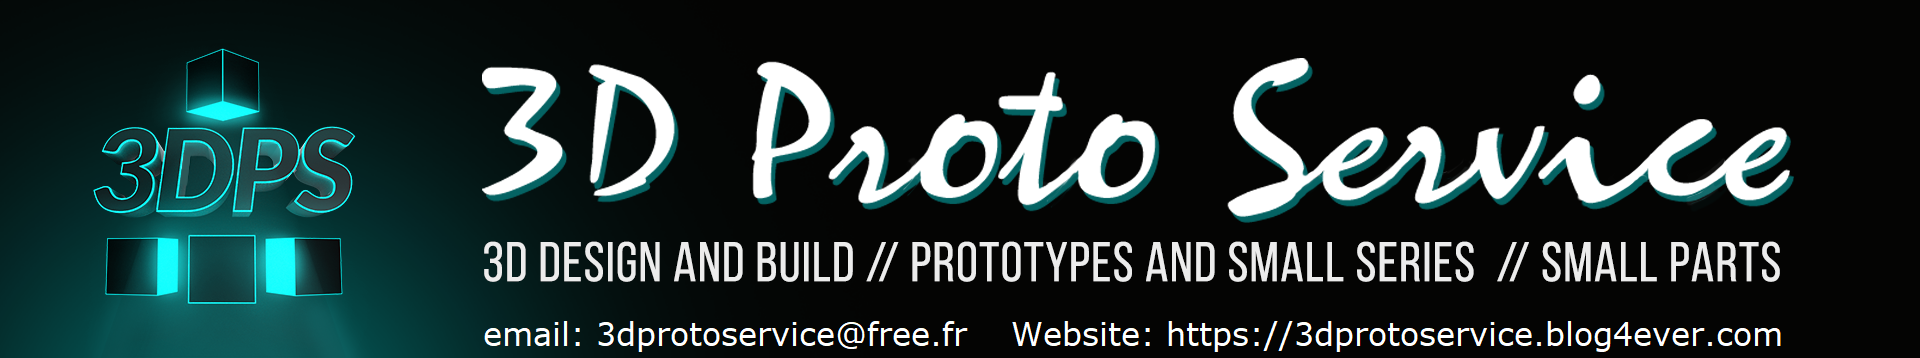 3dprotoservice@free.fr